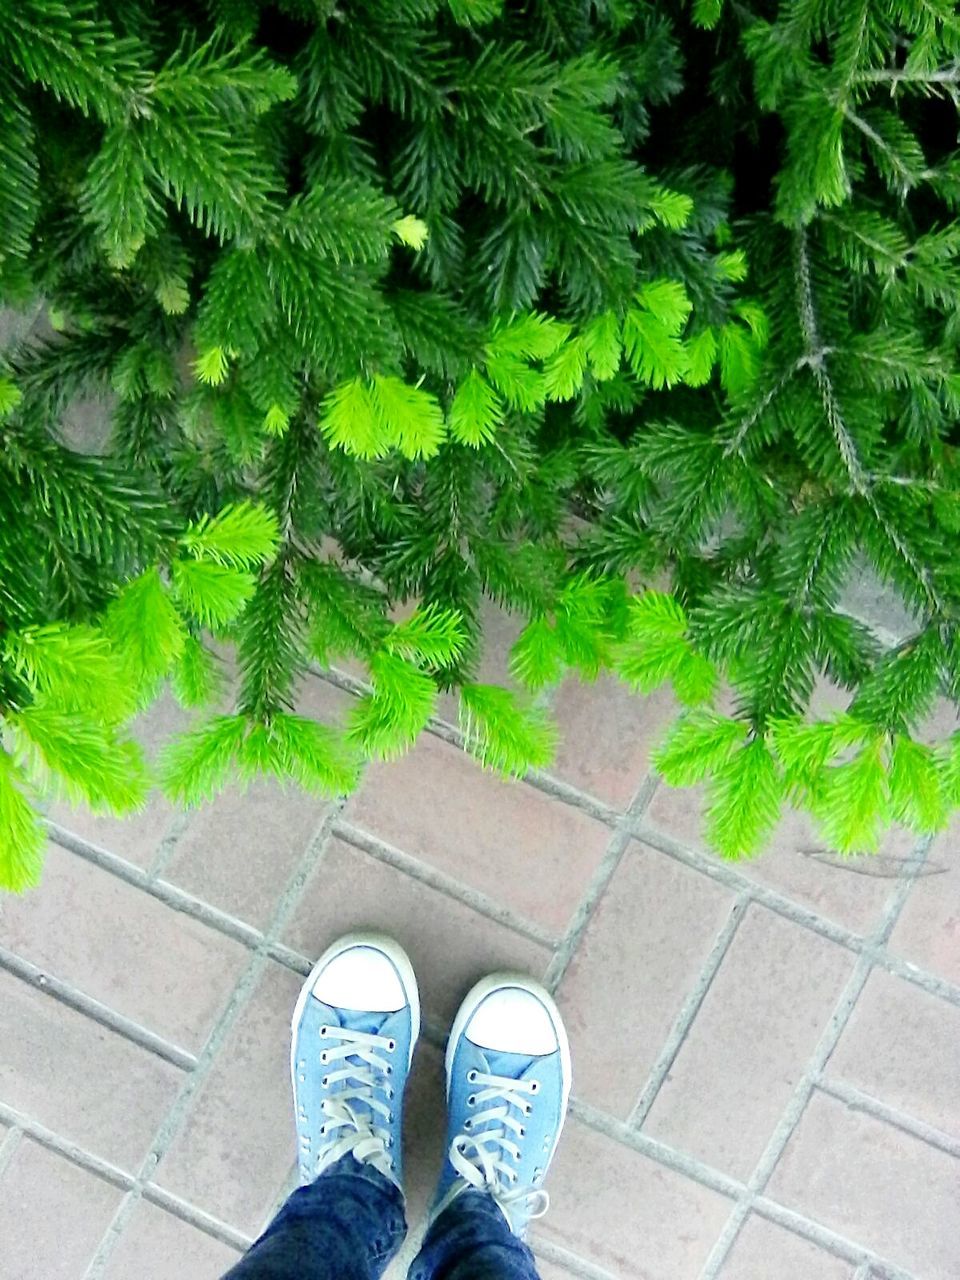 low section, shoe, human leg, high angle view, real people, one person, standing, footpath, green color, plant, day, jeans, personal perspective, outdoors, growth, human body part, street, trousers, leaf, men, lifestyles, nature, close-up, people